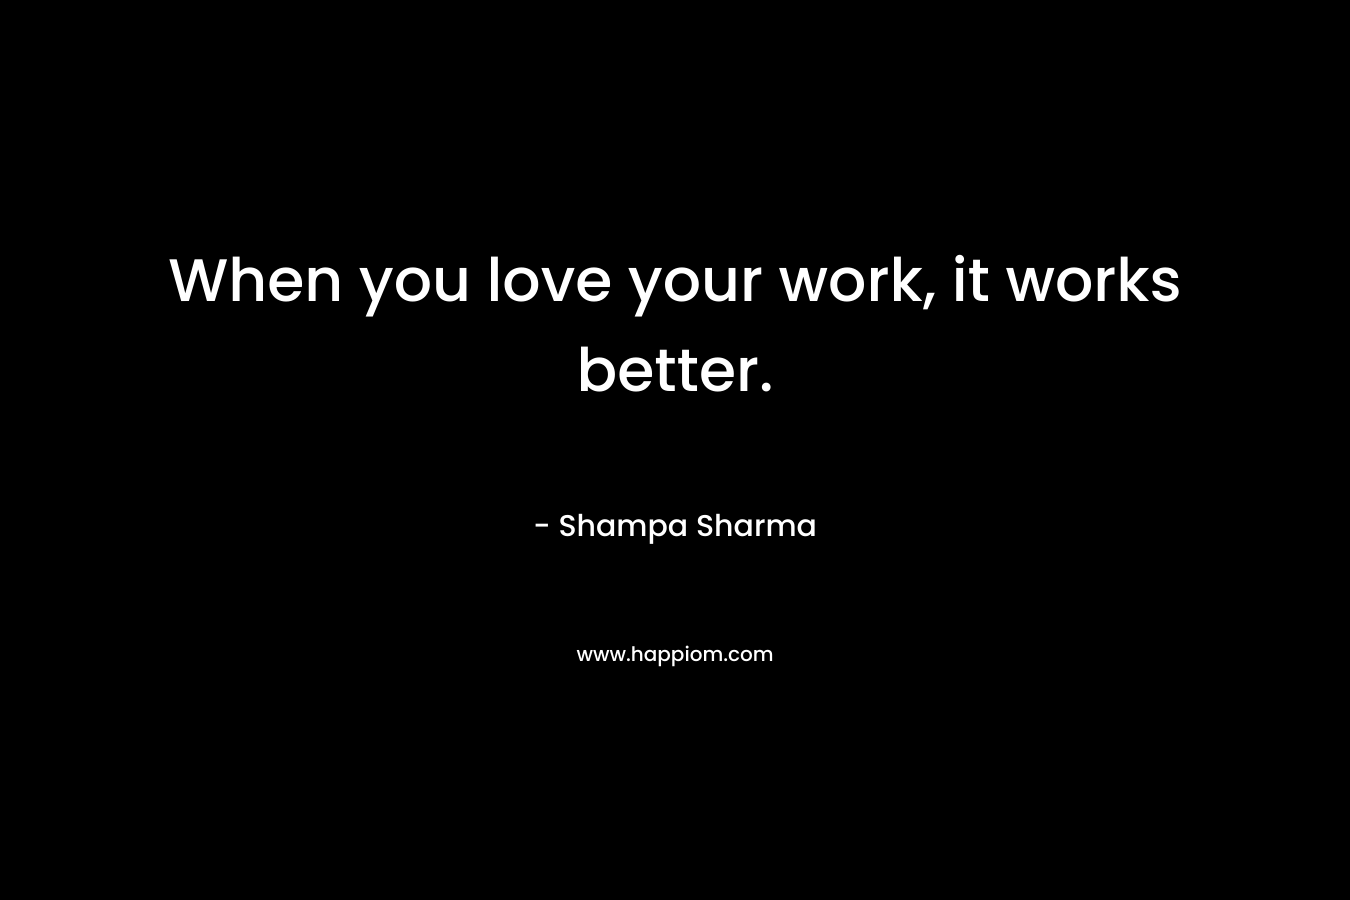 When you love your work, it works better.